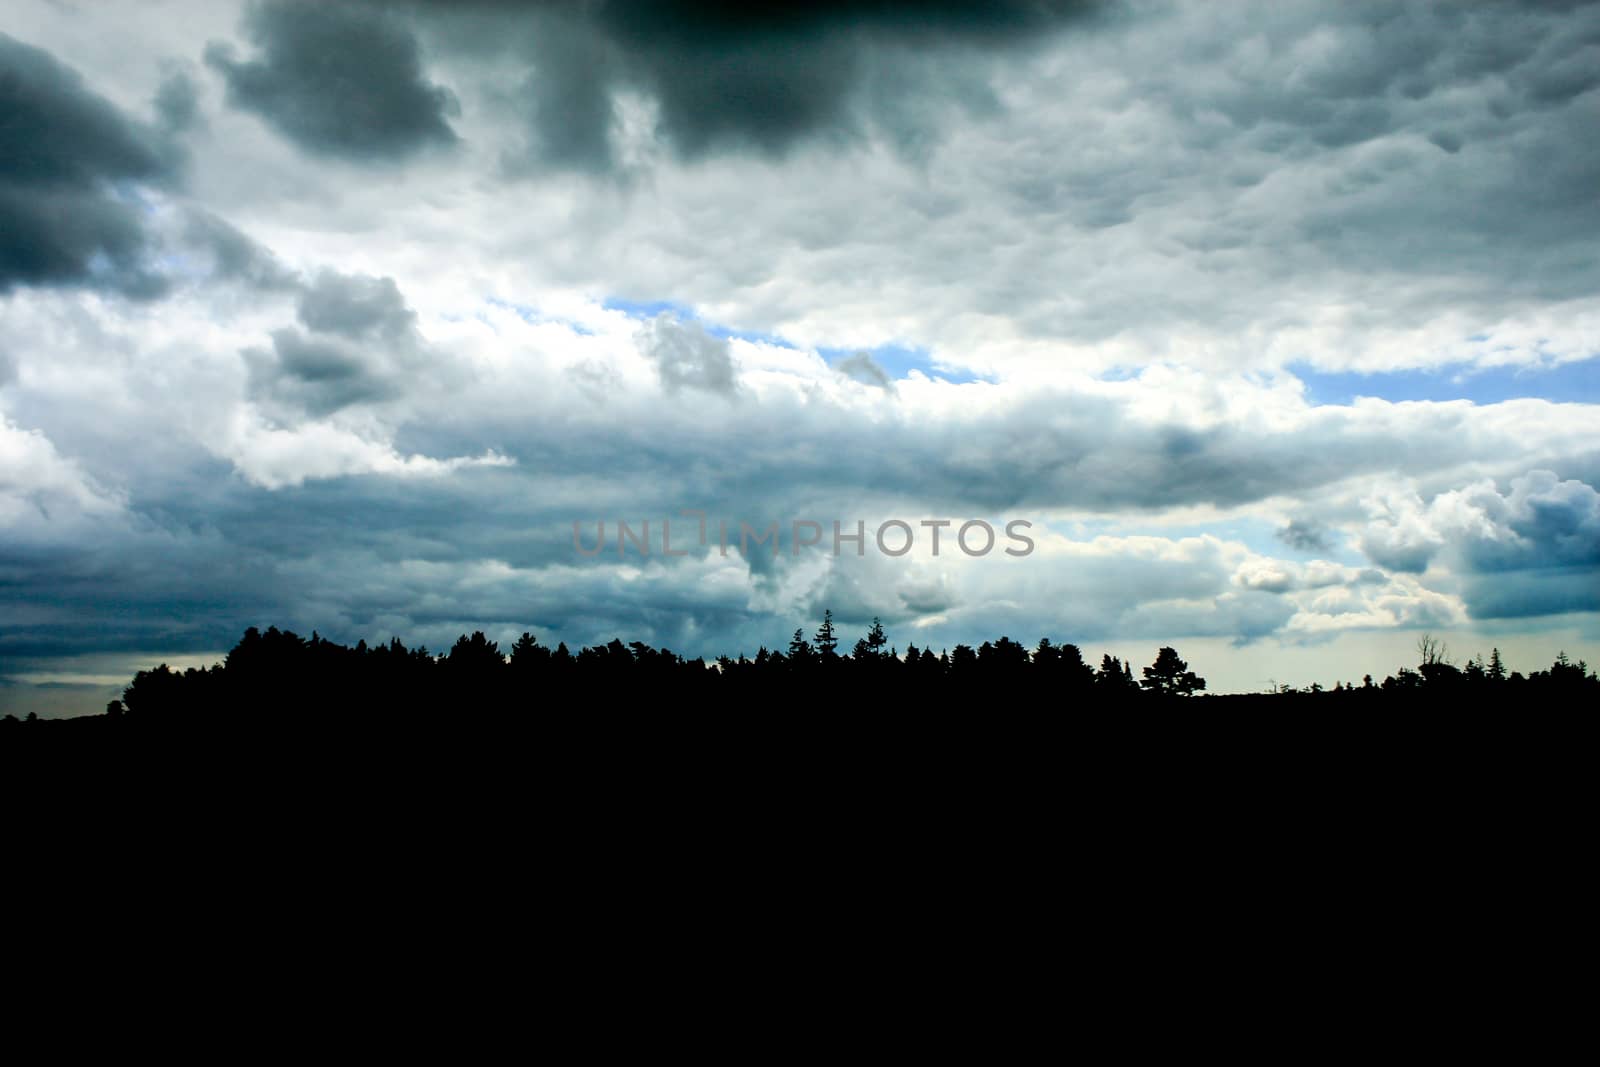 Stormy clouds and a forest in silhouette